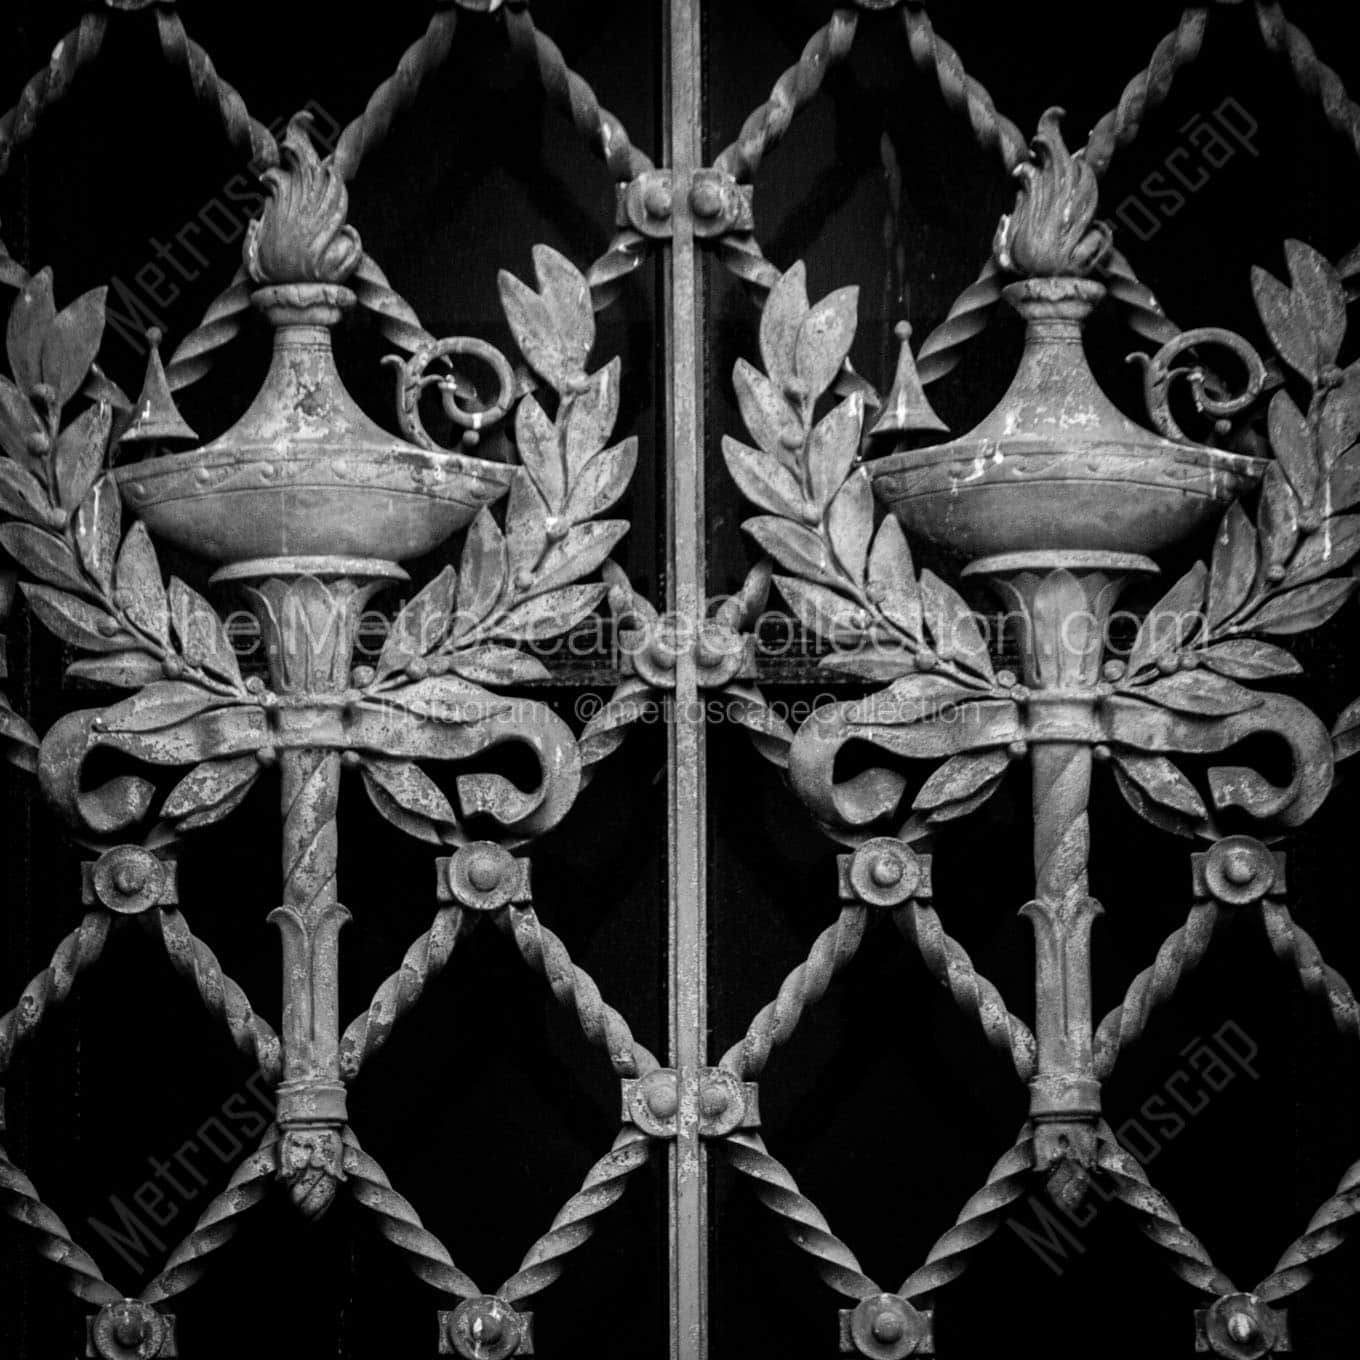 gated windows cleveland public library building Black & White Wall Art